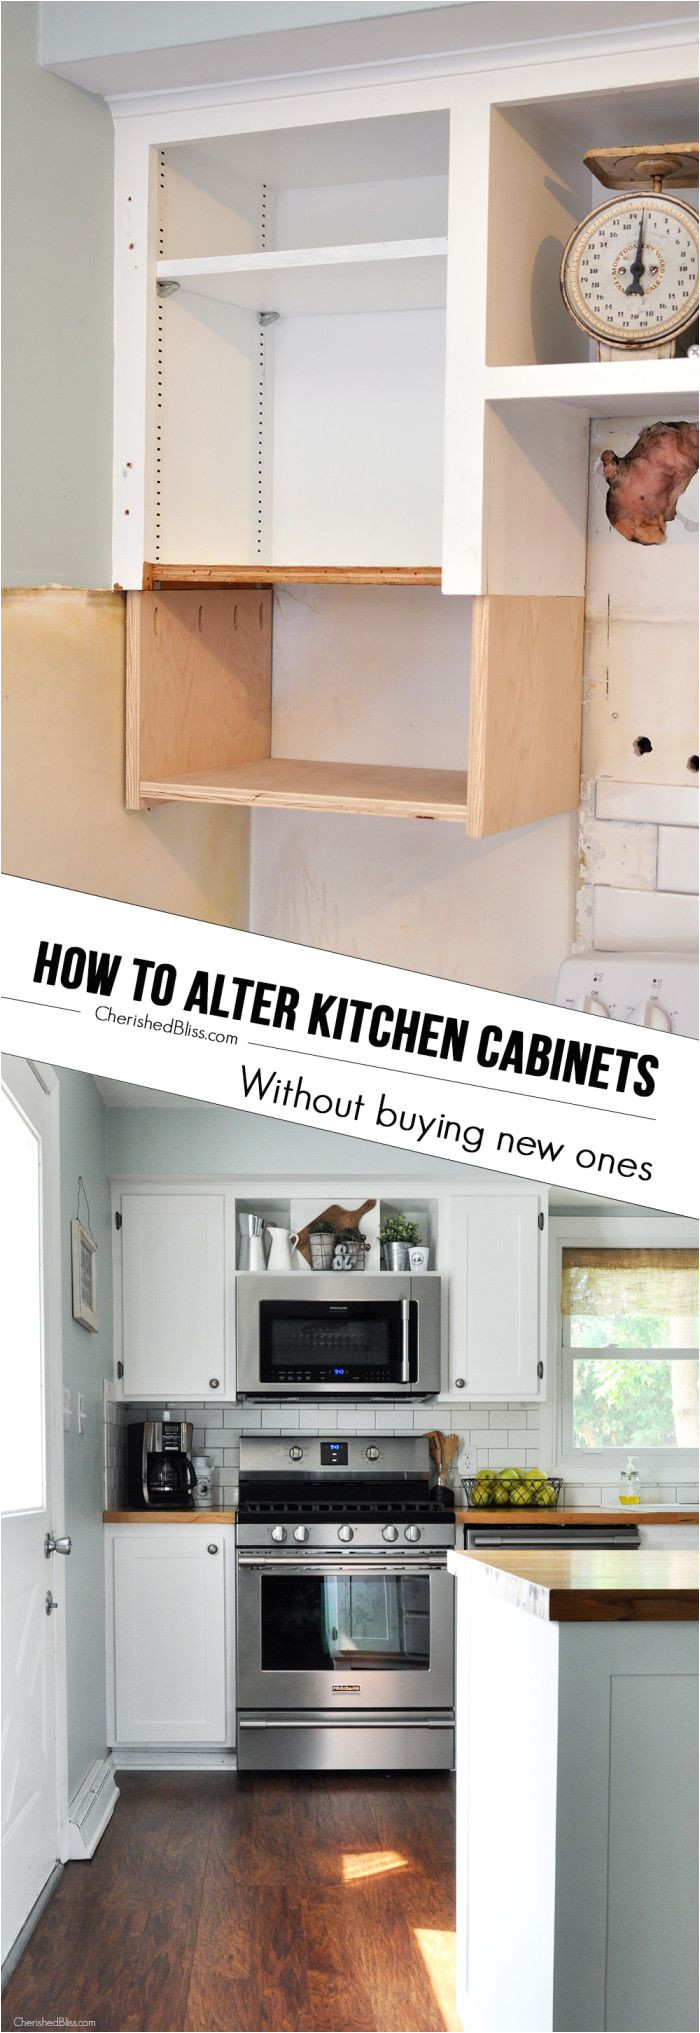 with this tutorial you will learn how to cut down a cabinet and alter the appearance